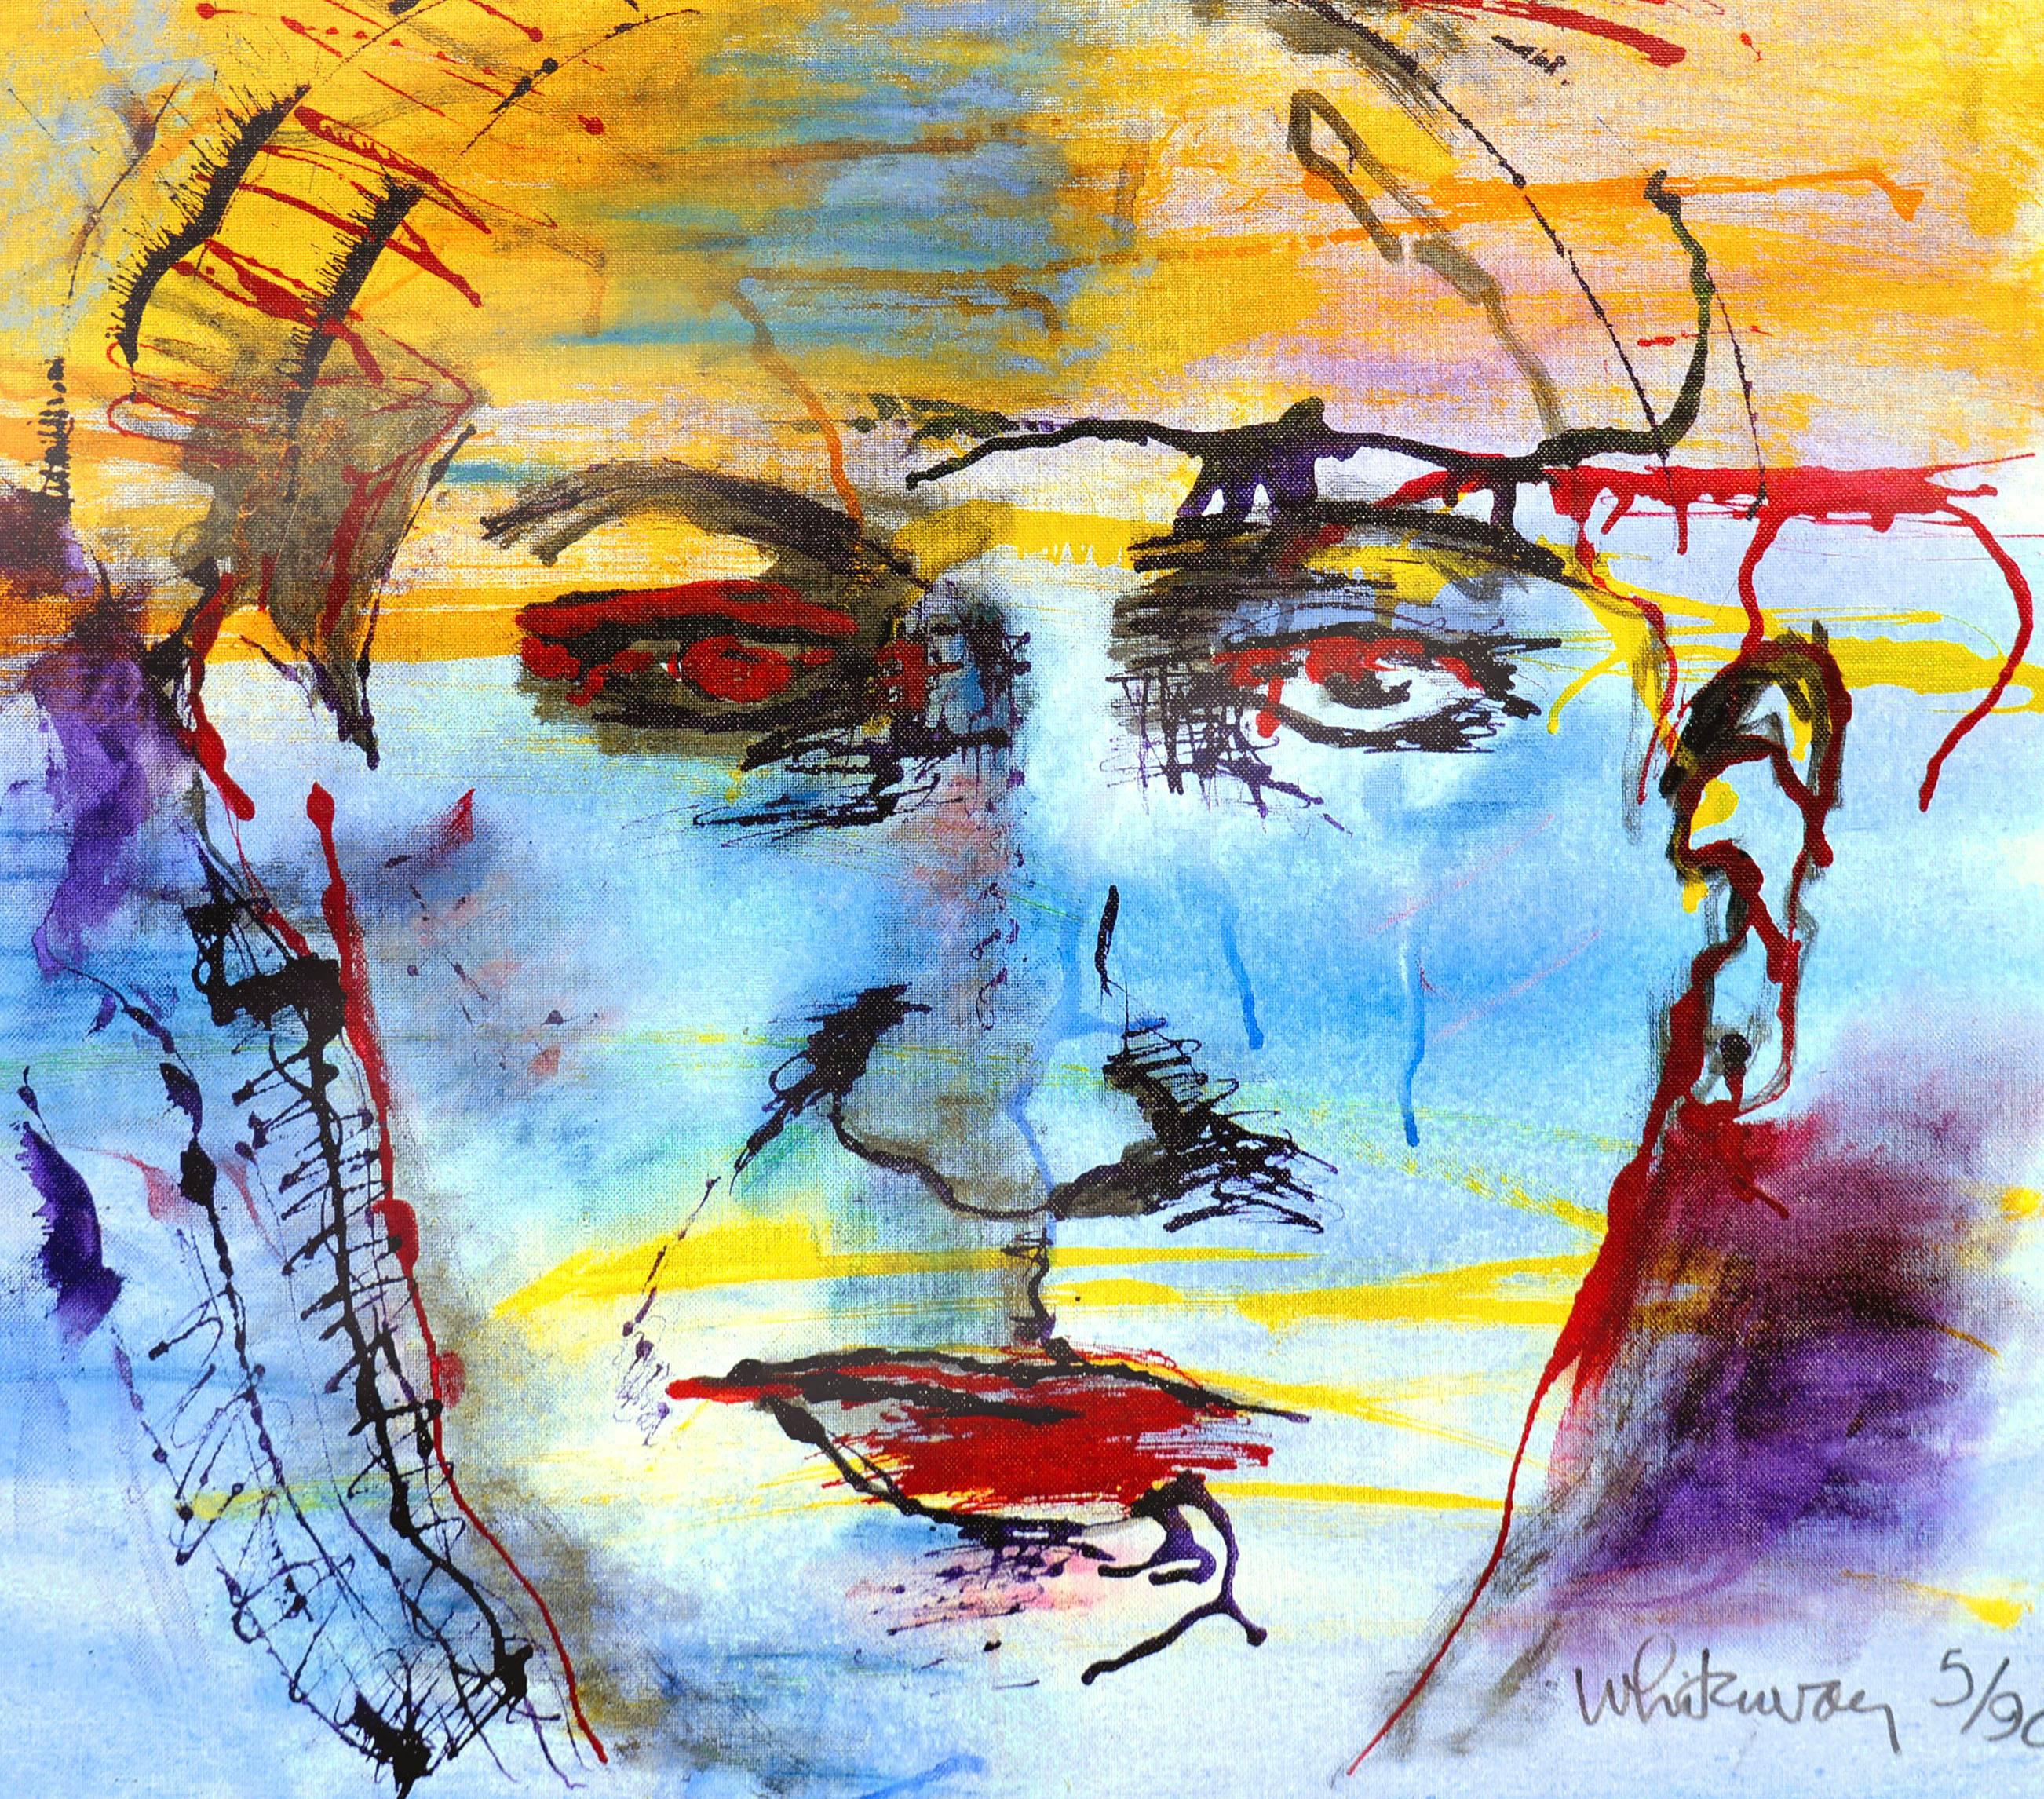 Abstracted Self Portrait by Erica Whiteway - Painting by Erika Whiteway 